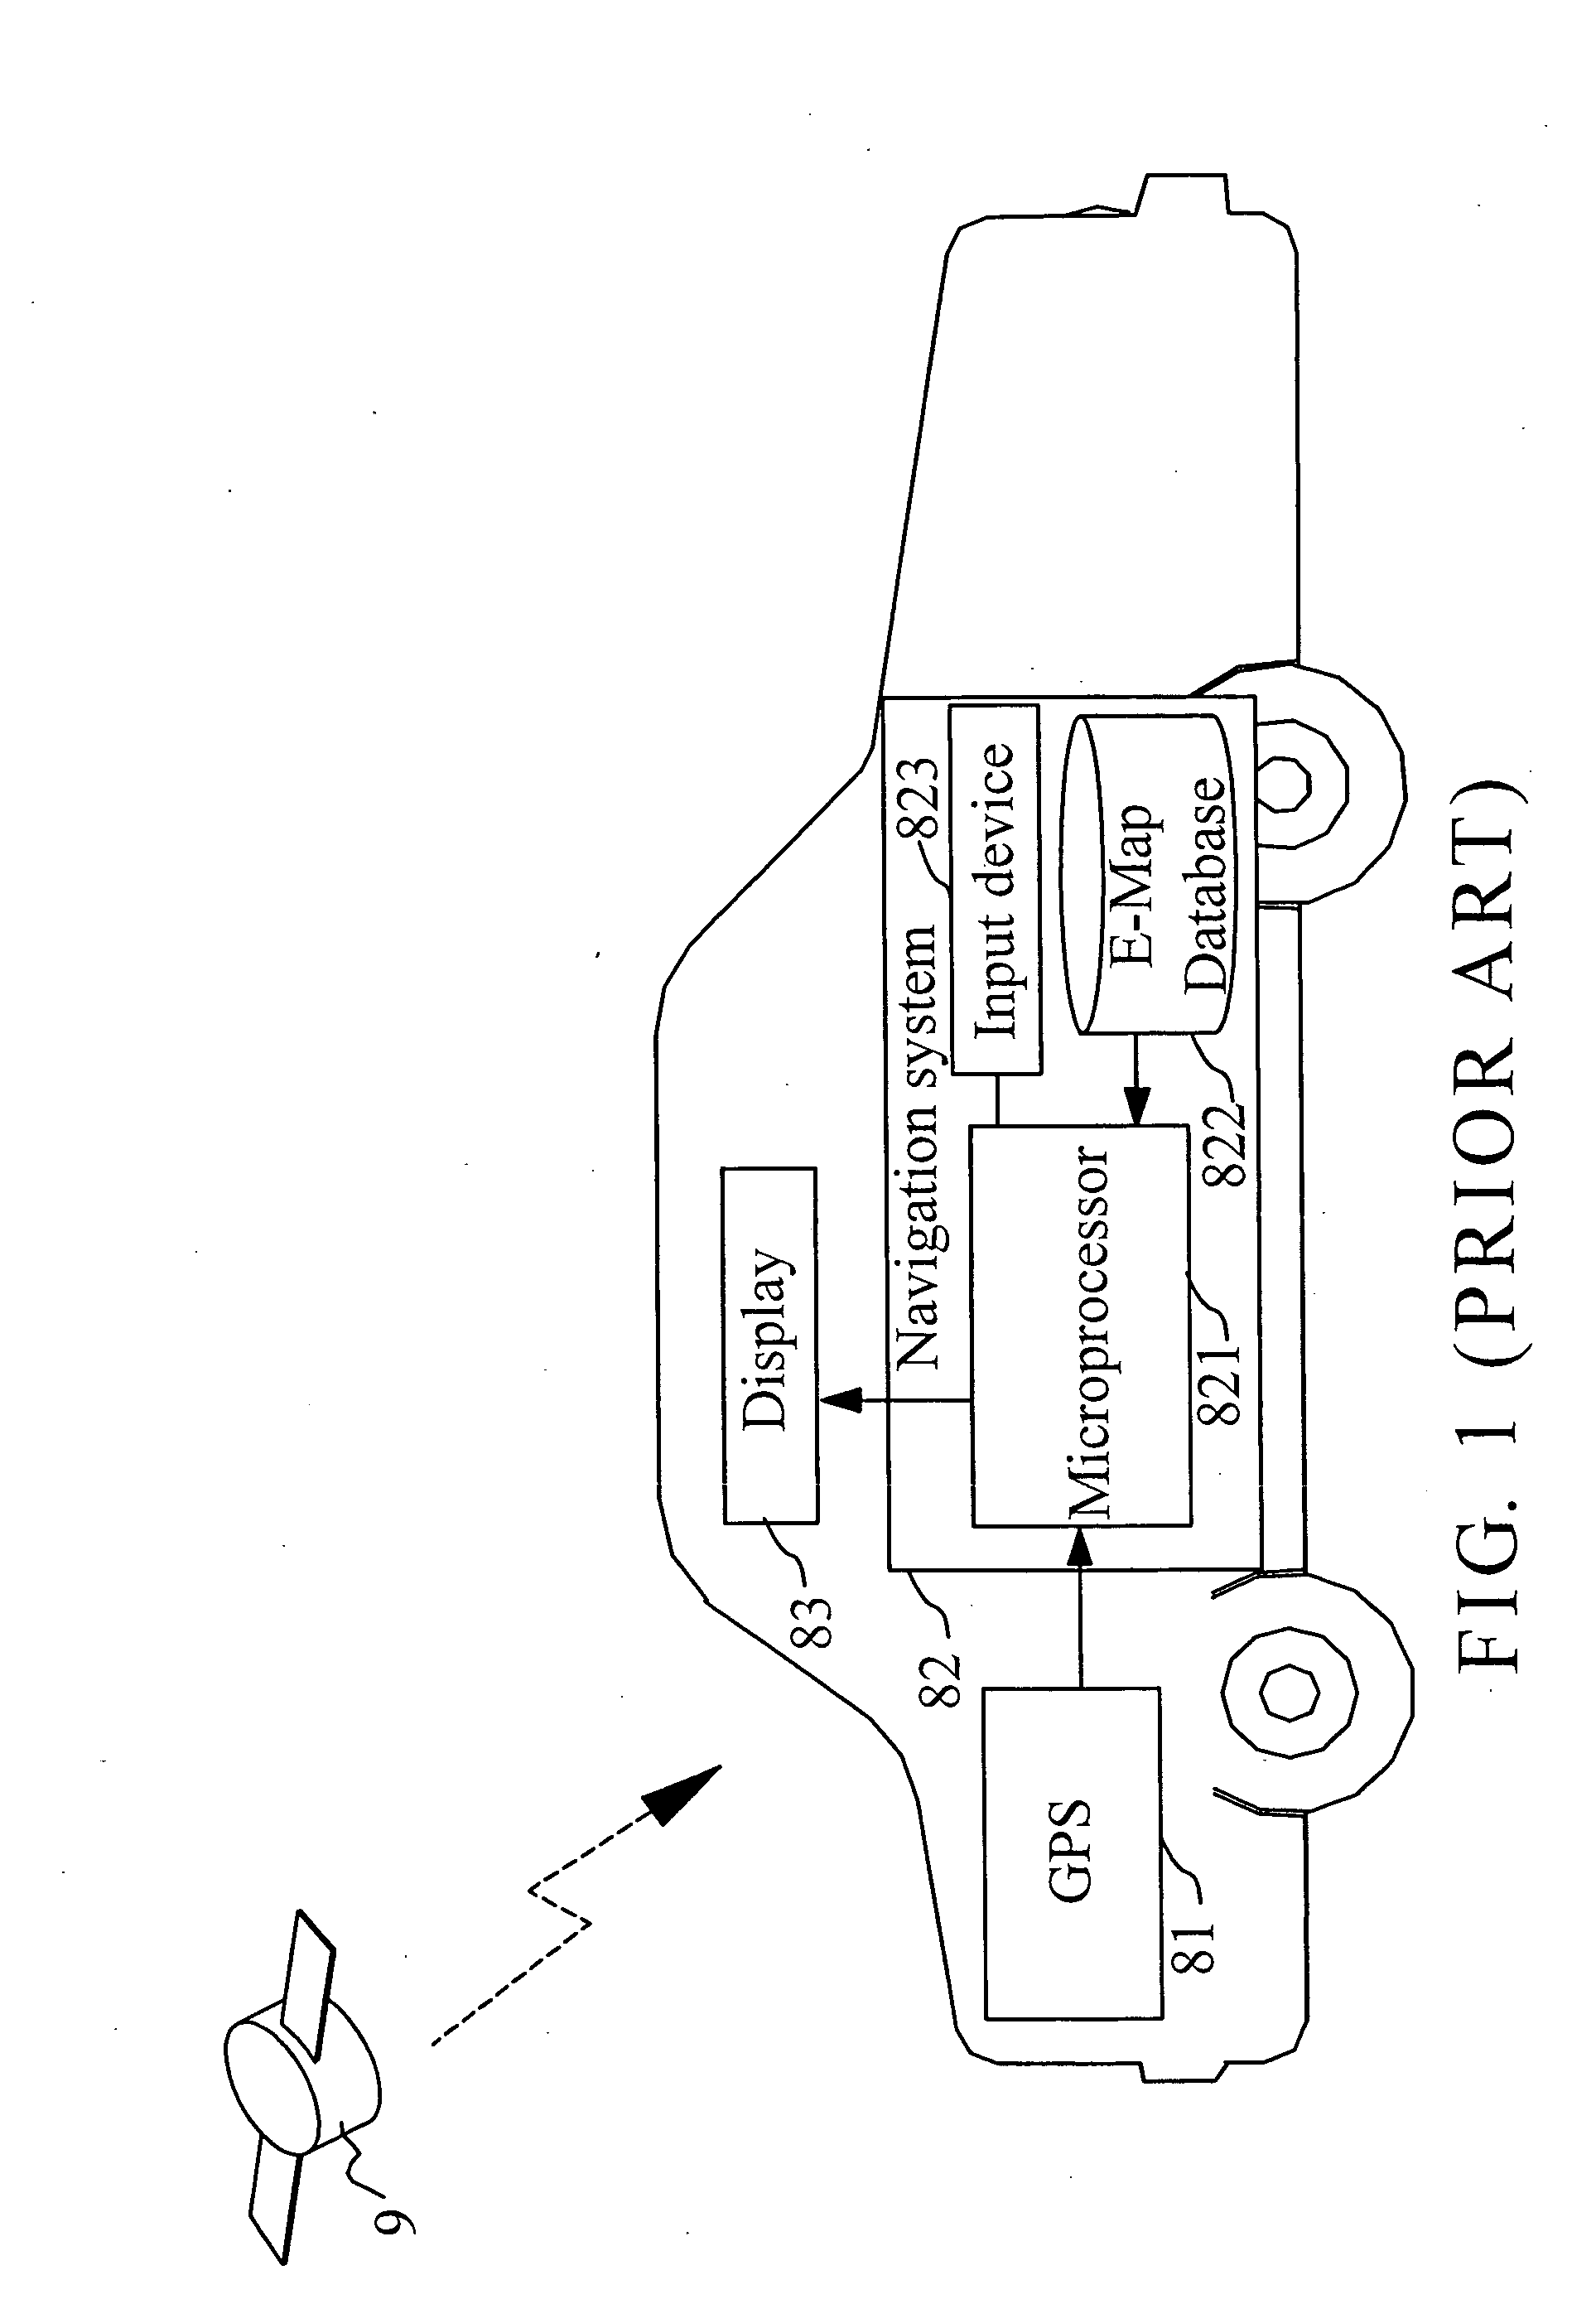 Vehicle dynamic navigation system and method